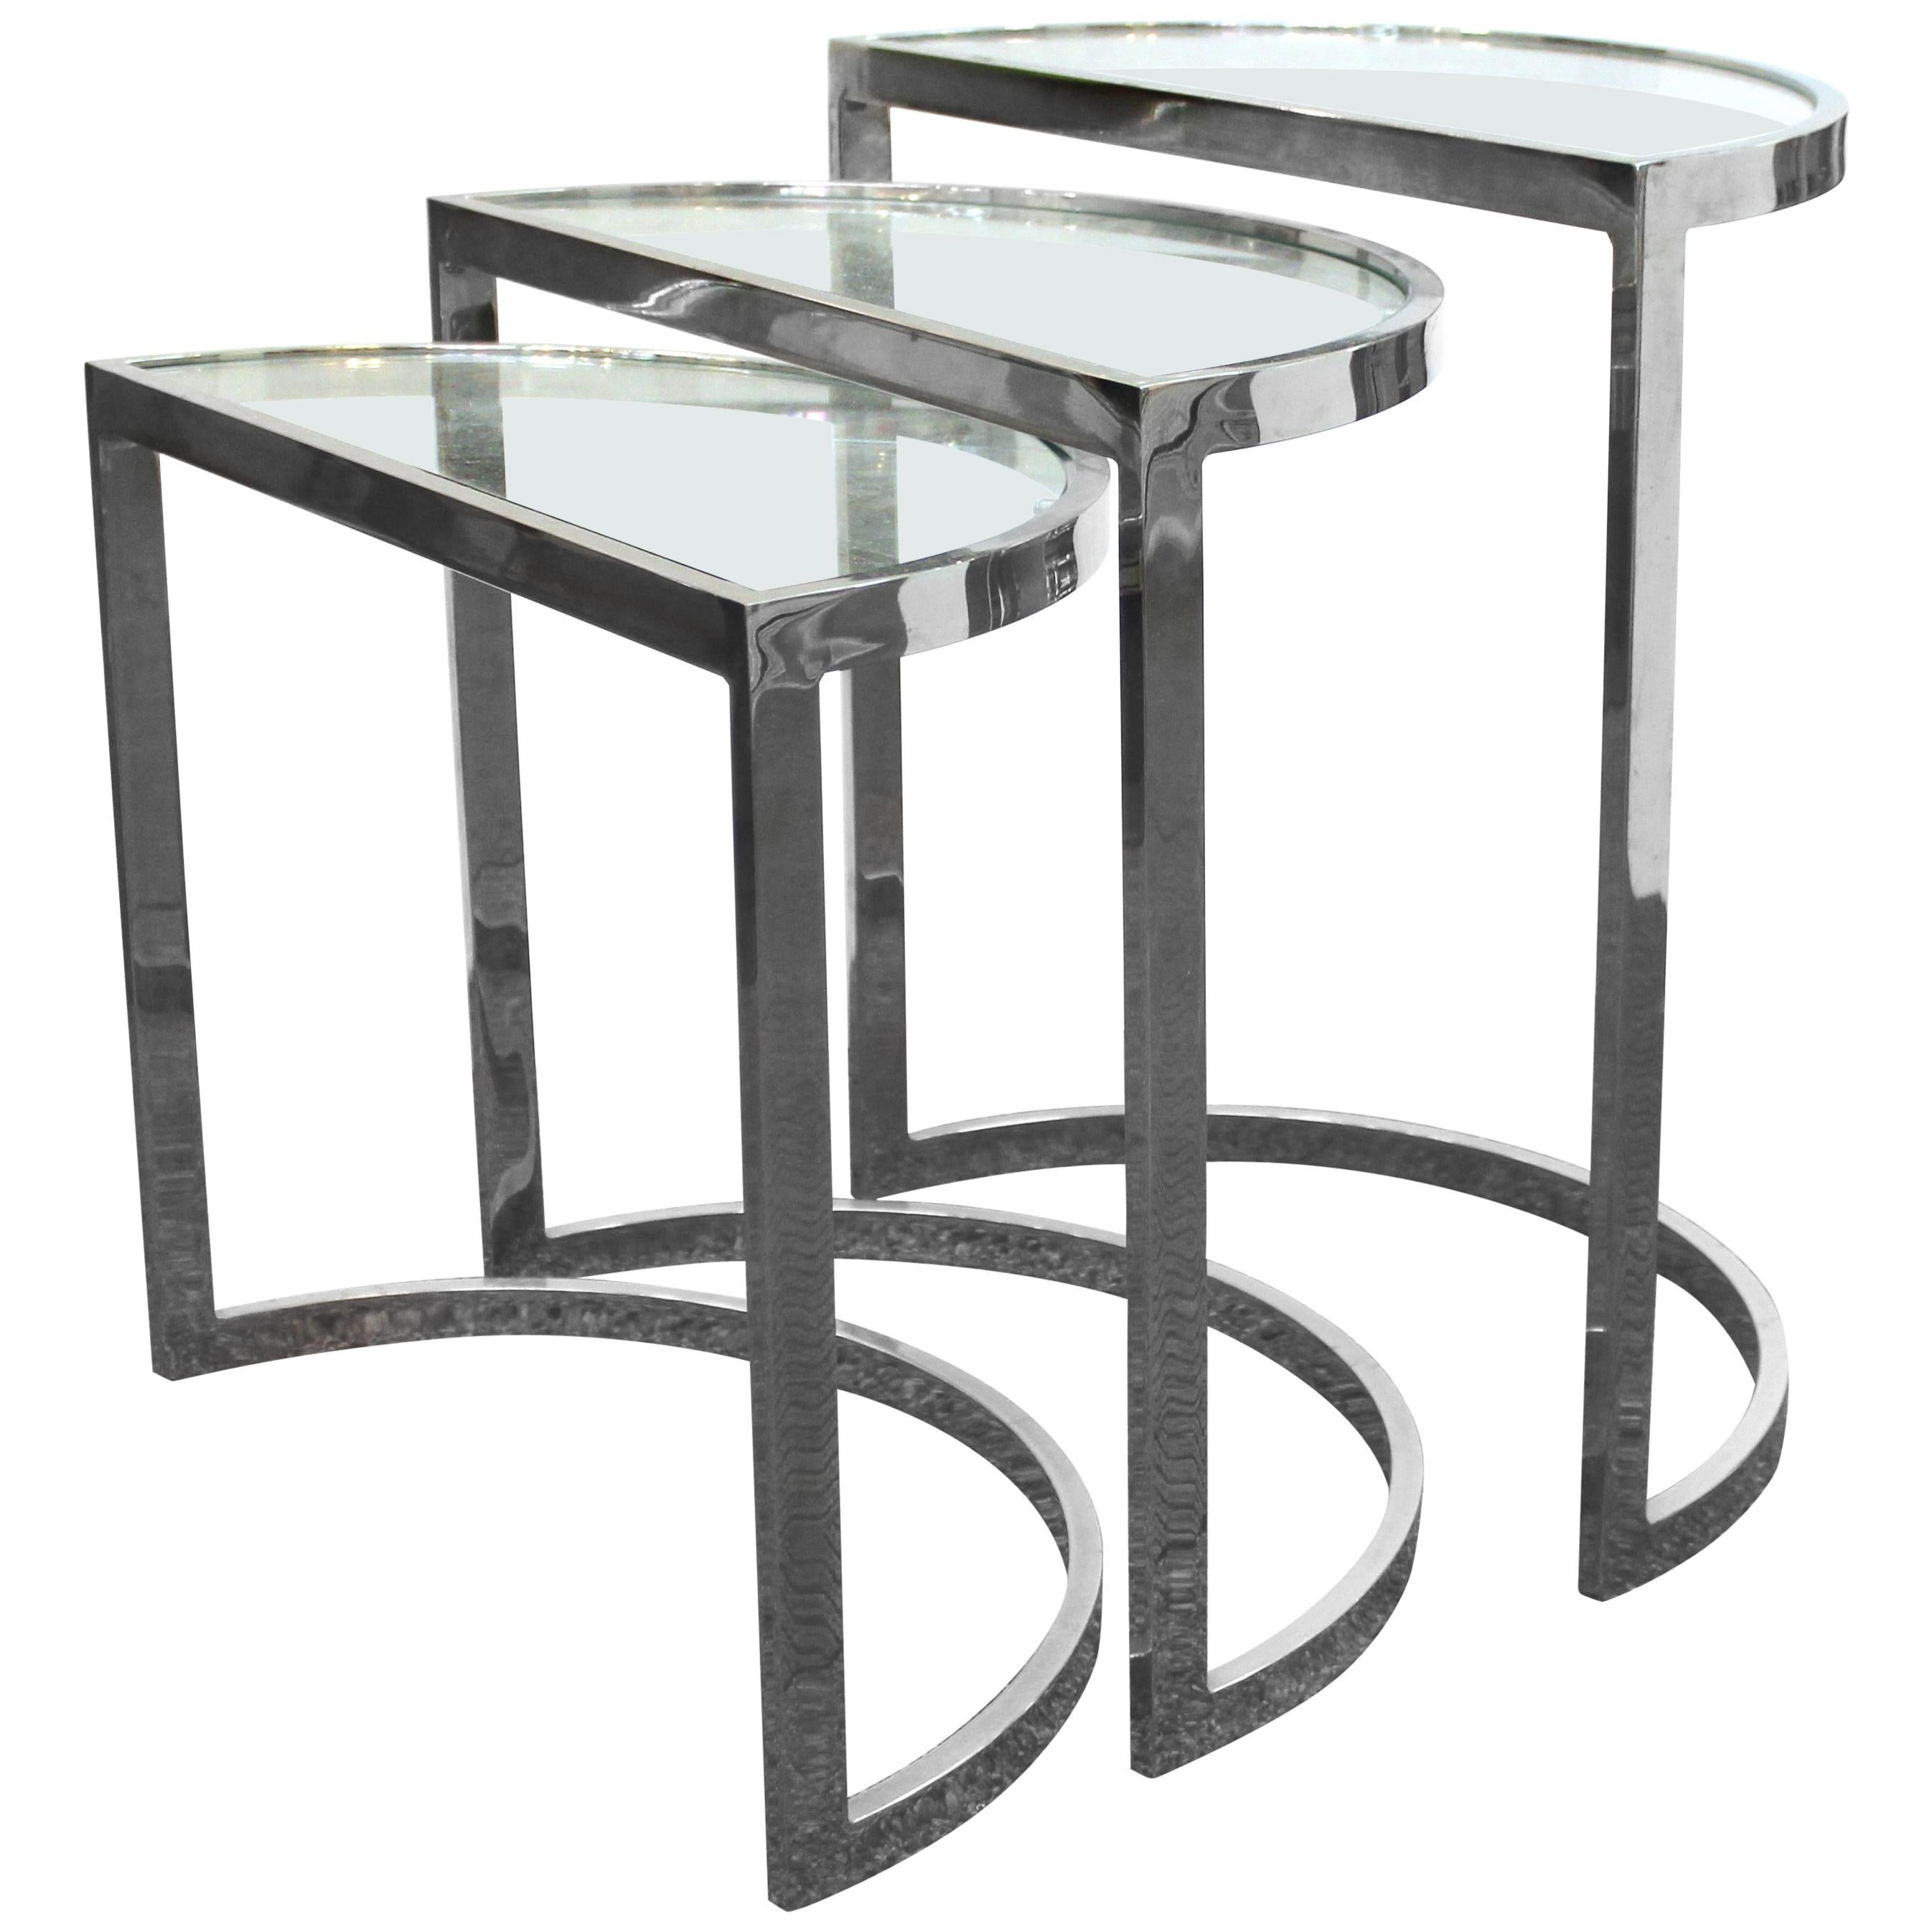 Mid-Century Modern Chrome Nesting Tables in Half-Moon Shapes